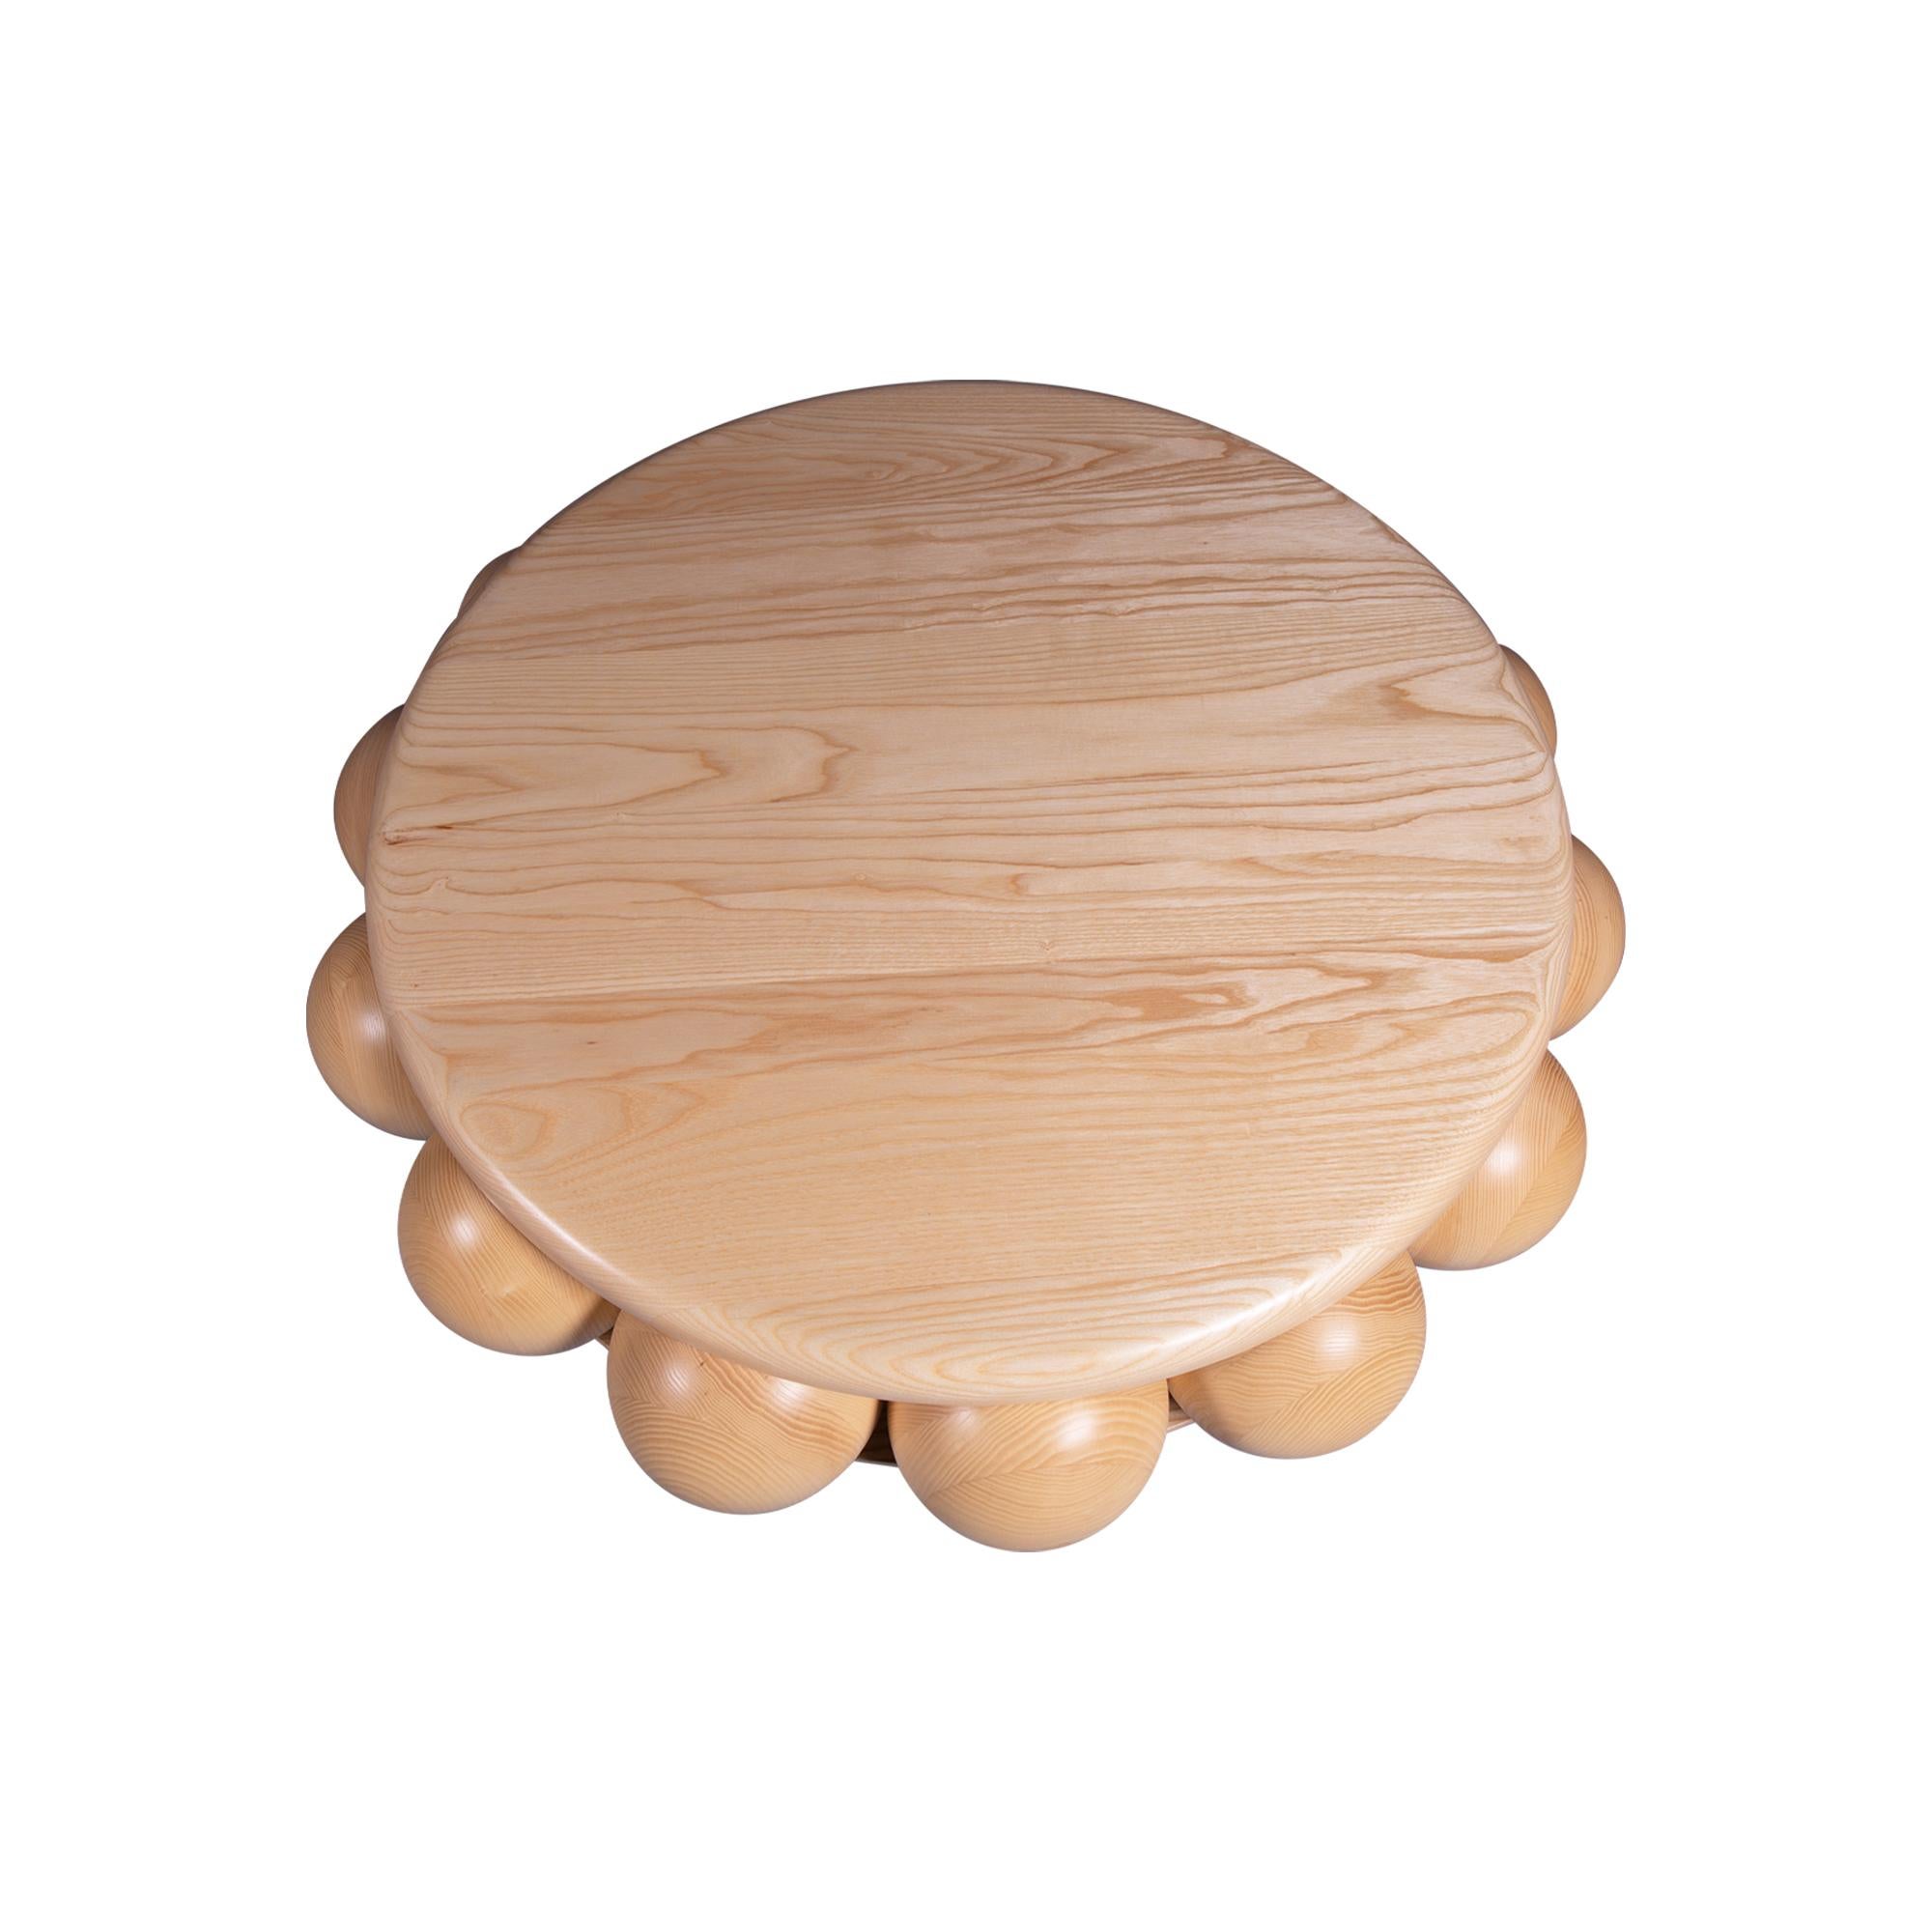 Macaroon coffee table utilises fourteen spheres like berries, sandwiched between two round plates and made of 3D milled stained ash, available in either black, white or natural finish.